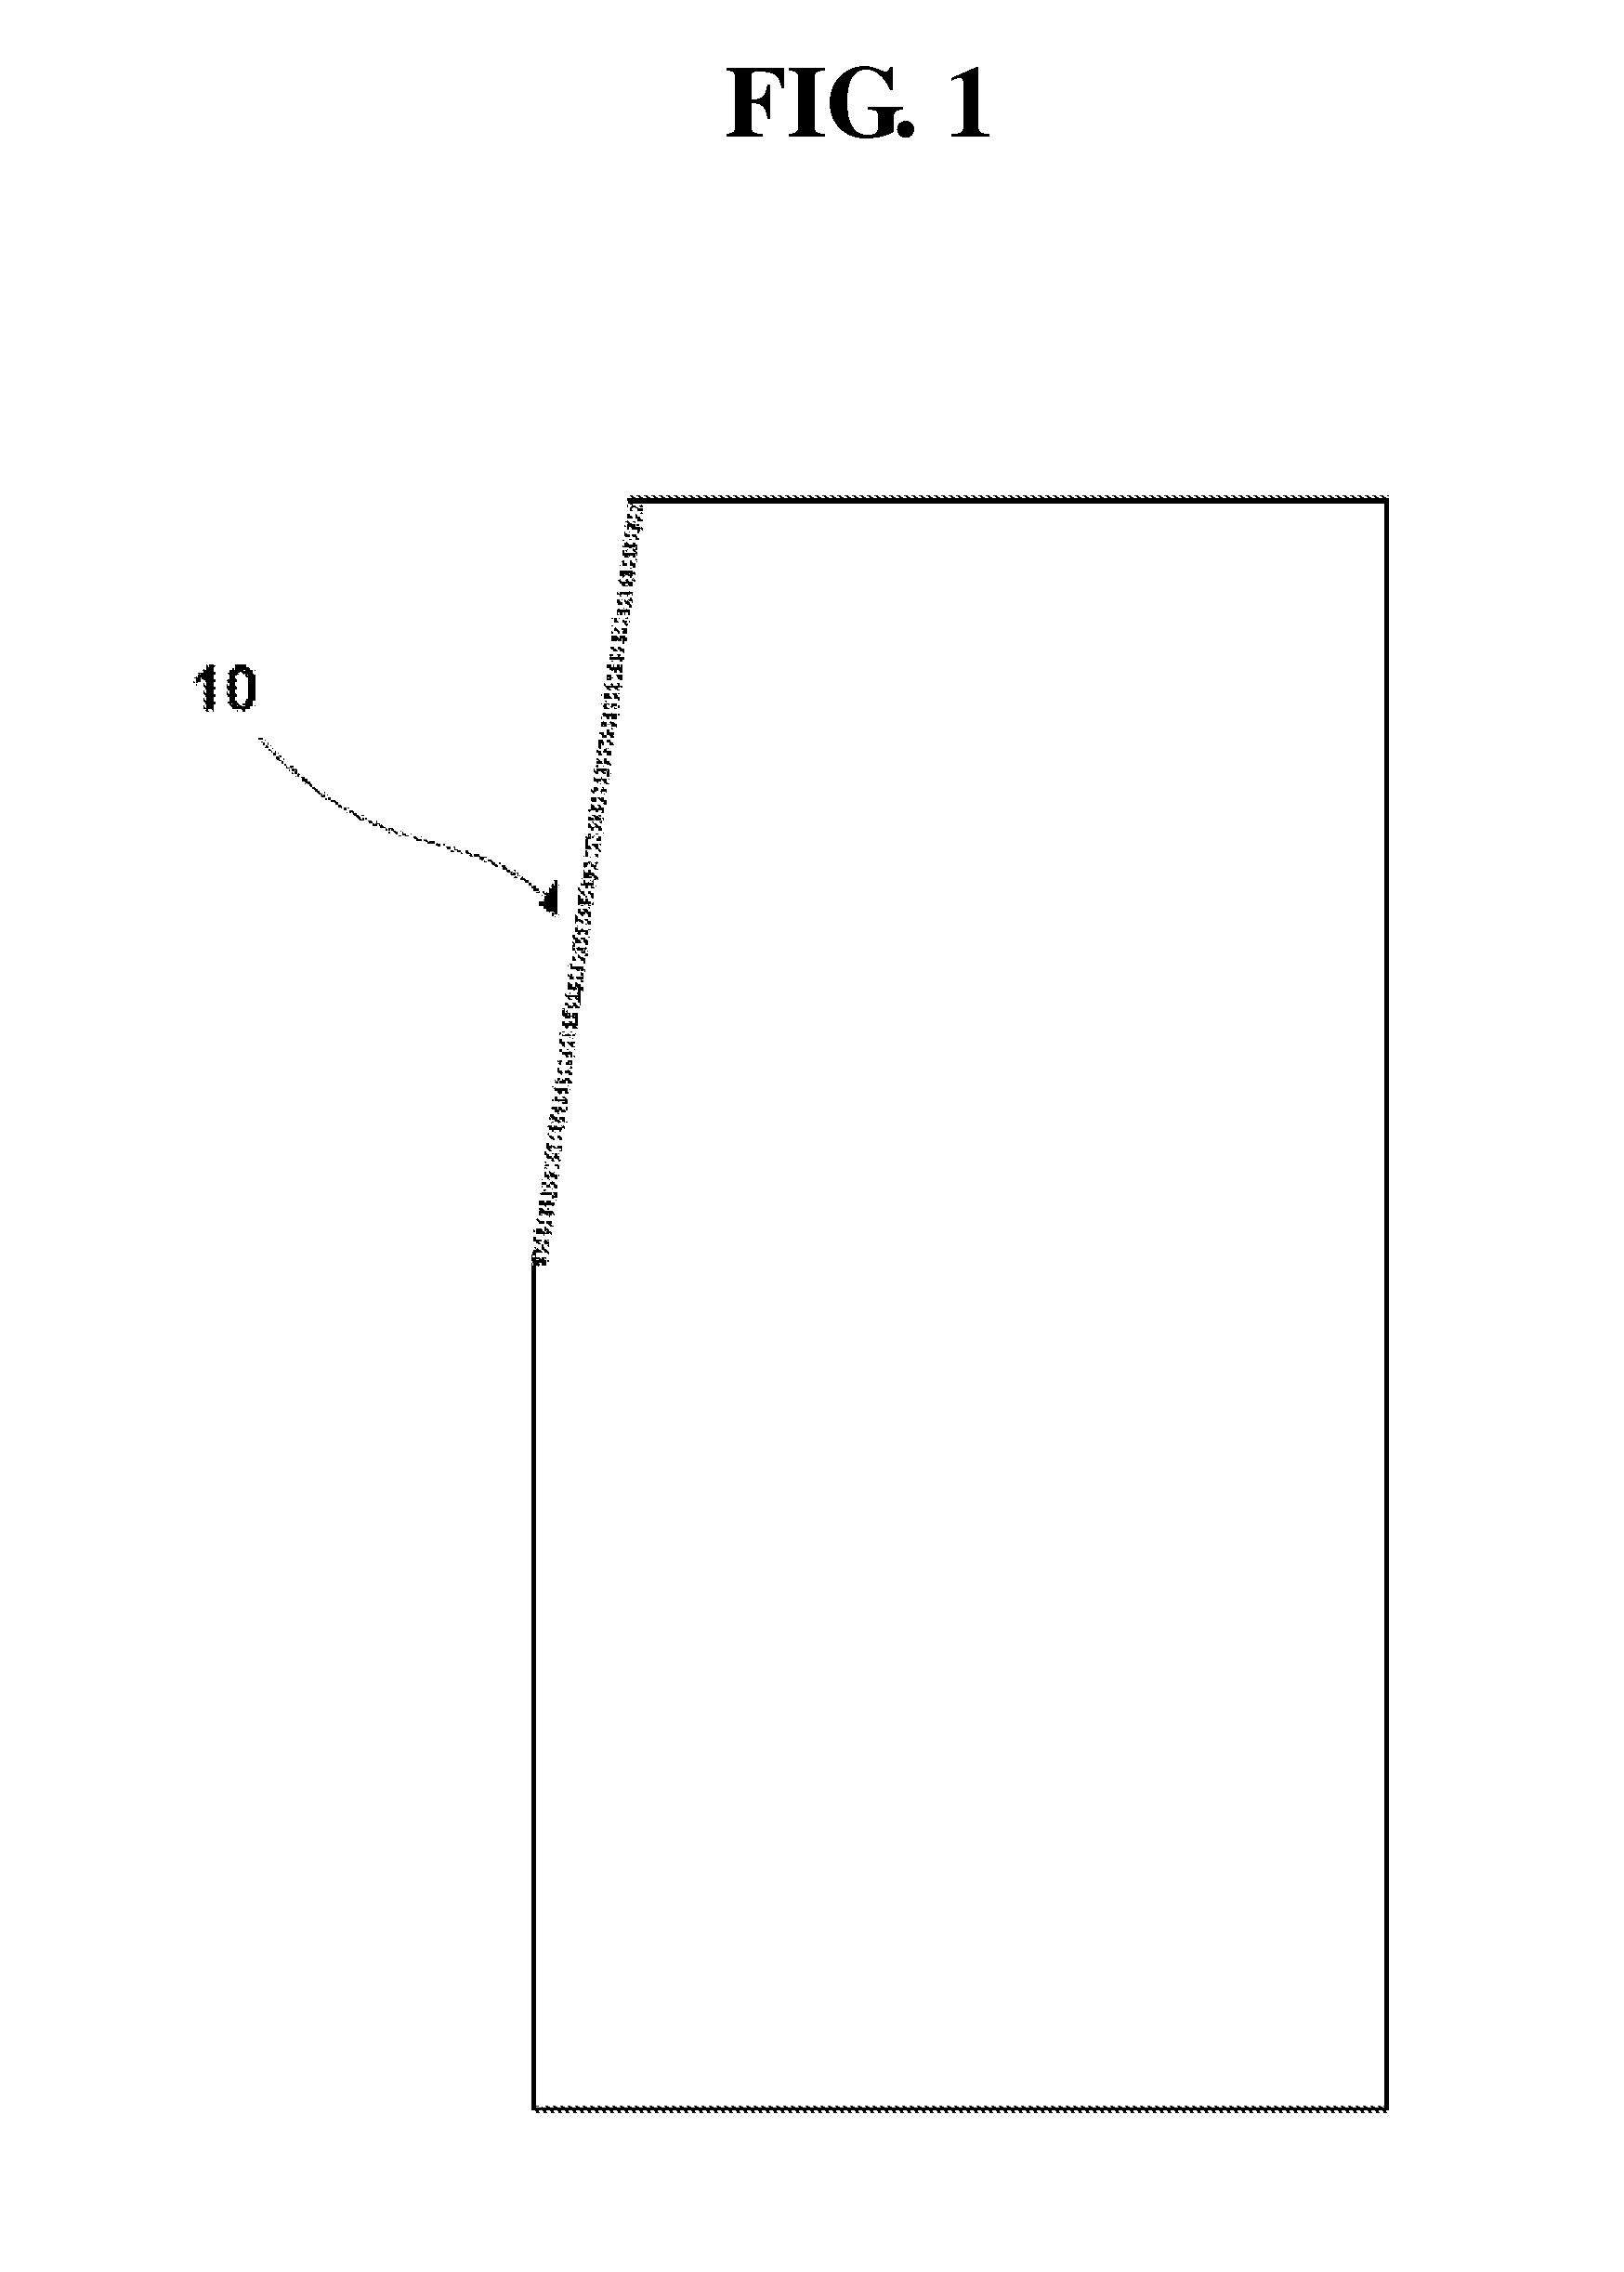 Bag for pant pocket with a plurality of internal pockets and method of fabricating the same